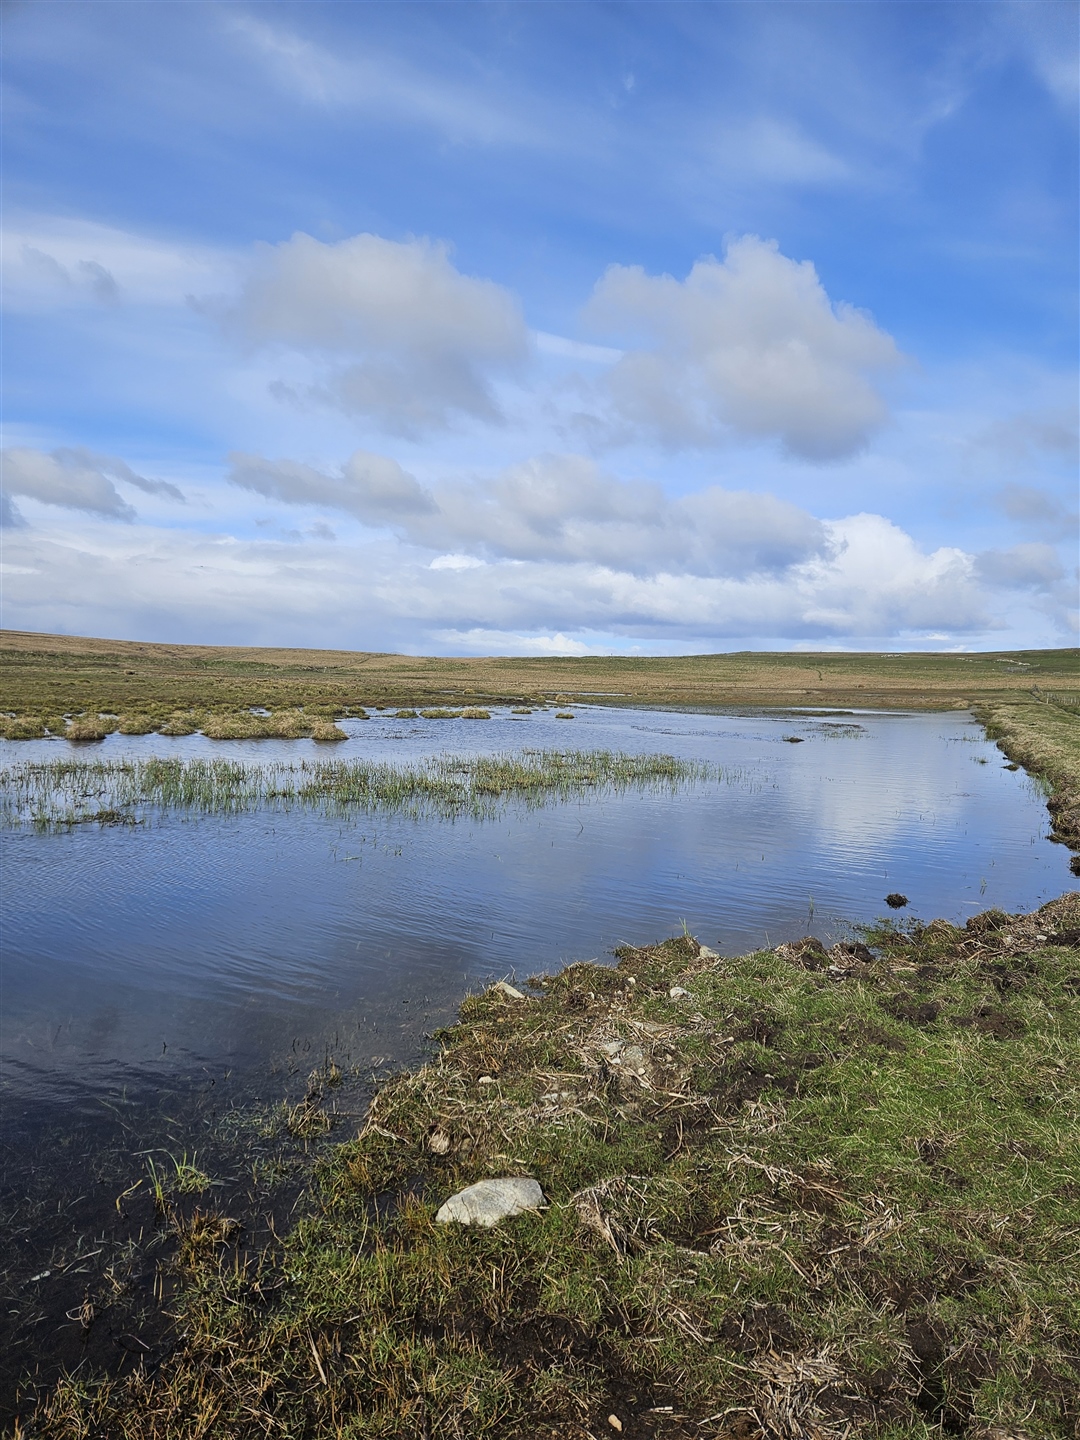 A wetland site with blue sky above. Water levels are high coming near to the top of the bank